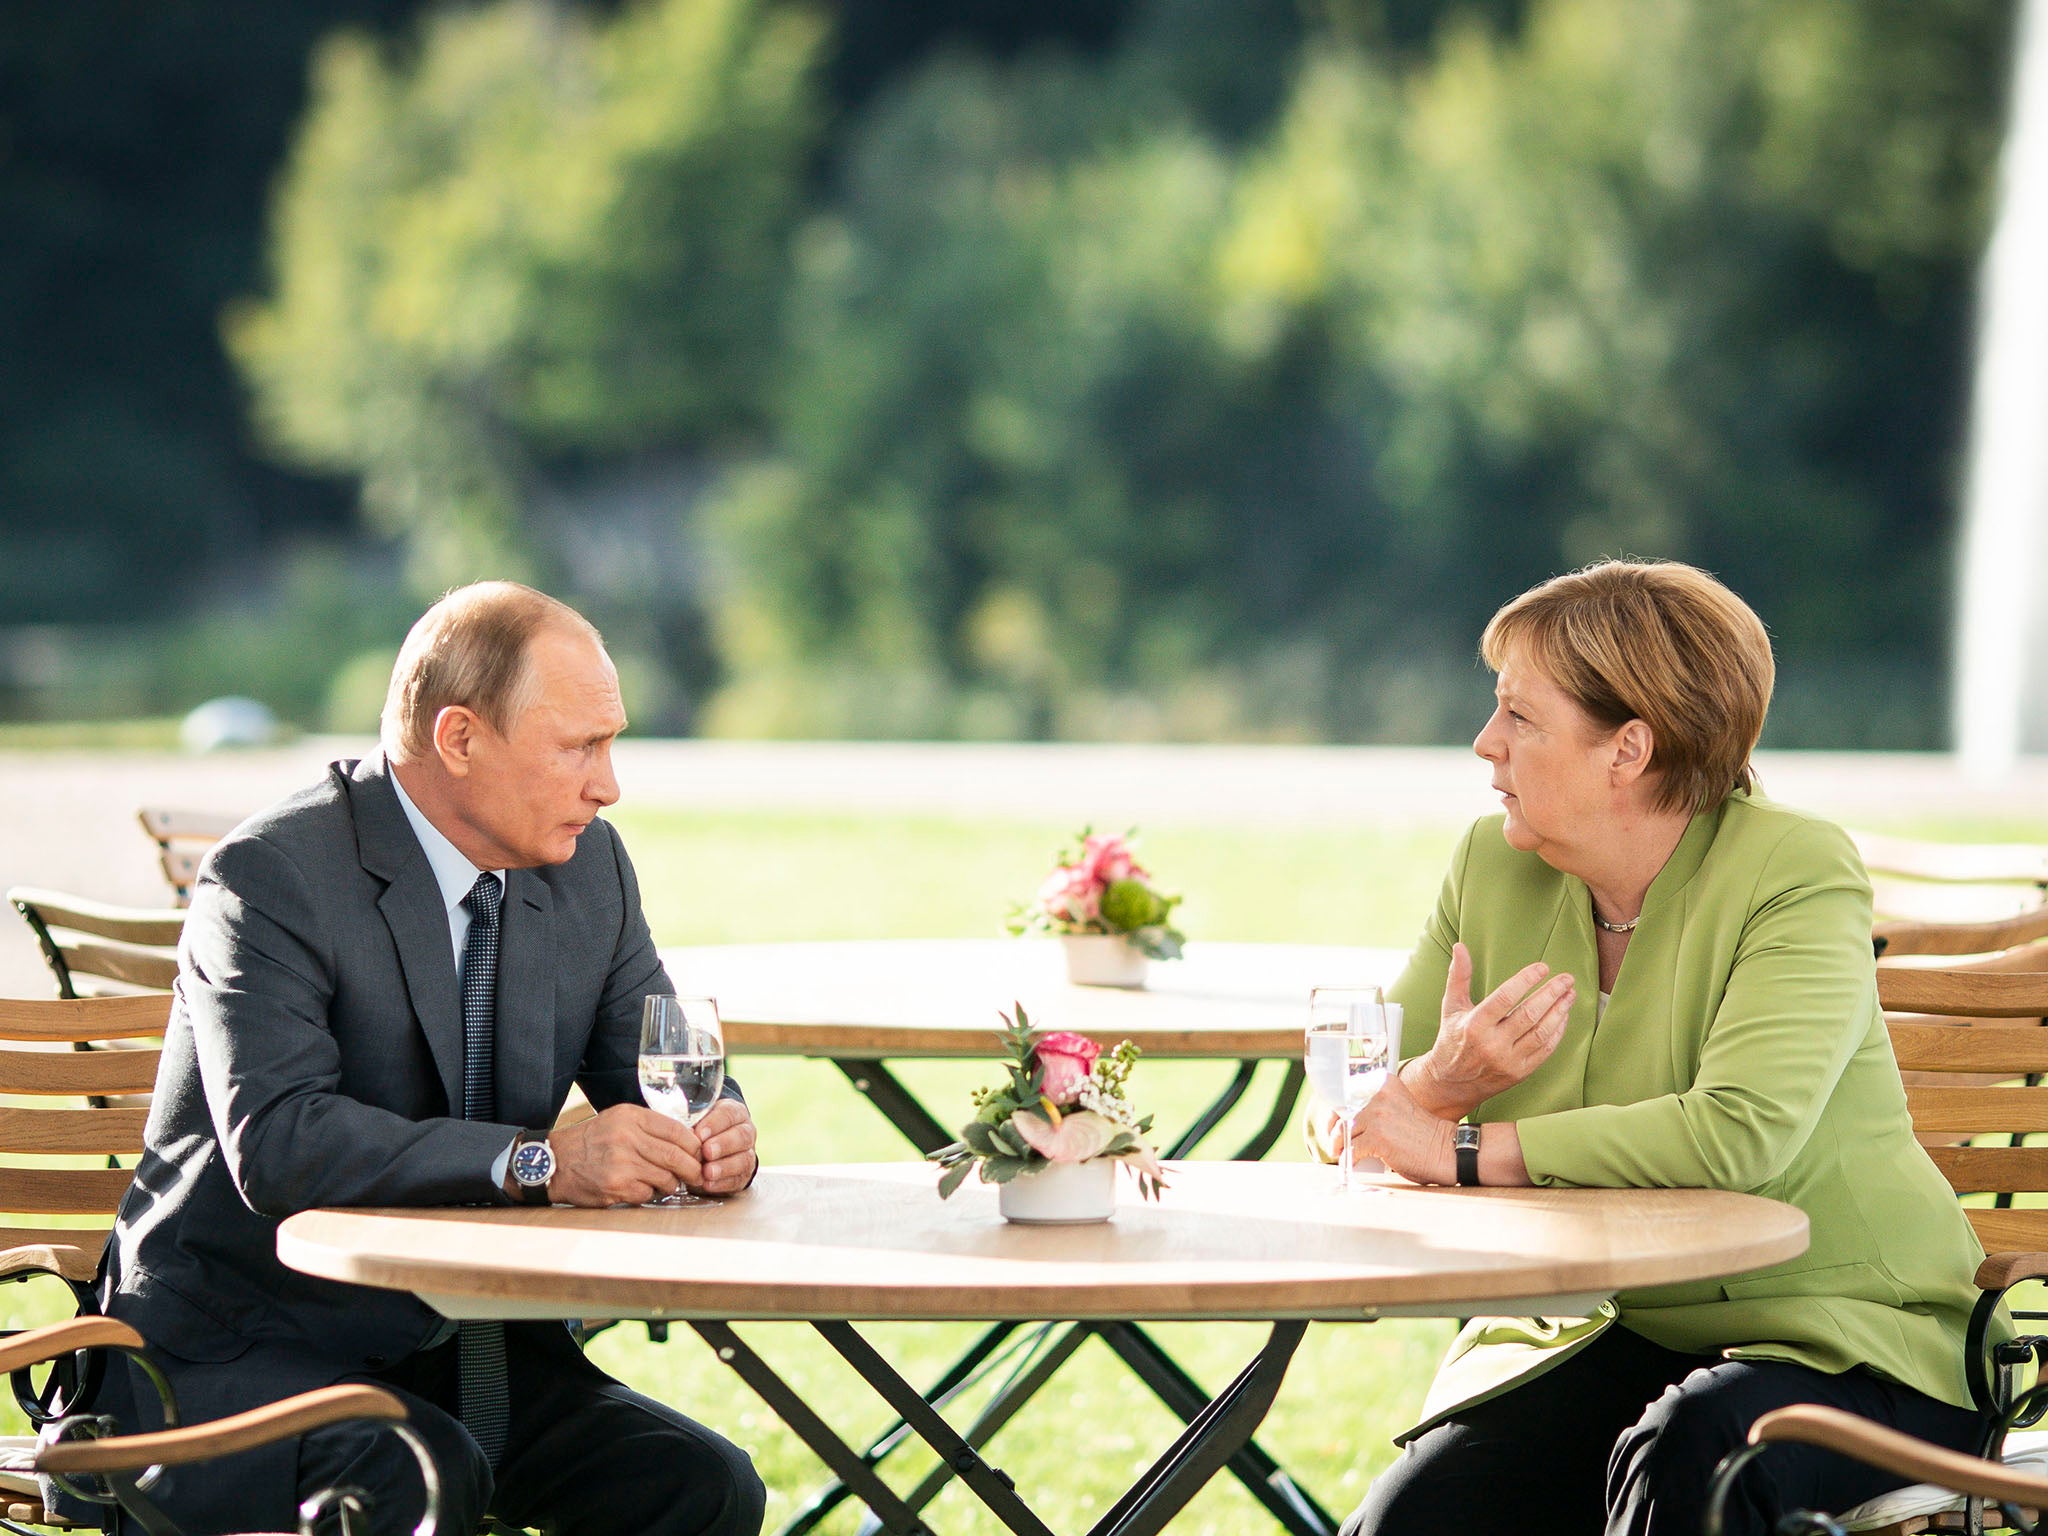 Vladimir Putin meets Angela Merkel to discuss Russian sanctions in August 2018 – they’re not as important as you might think (Bundesregierung/Getty)